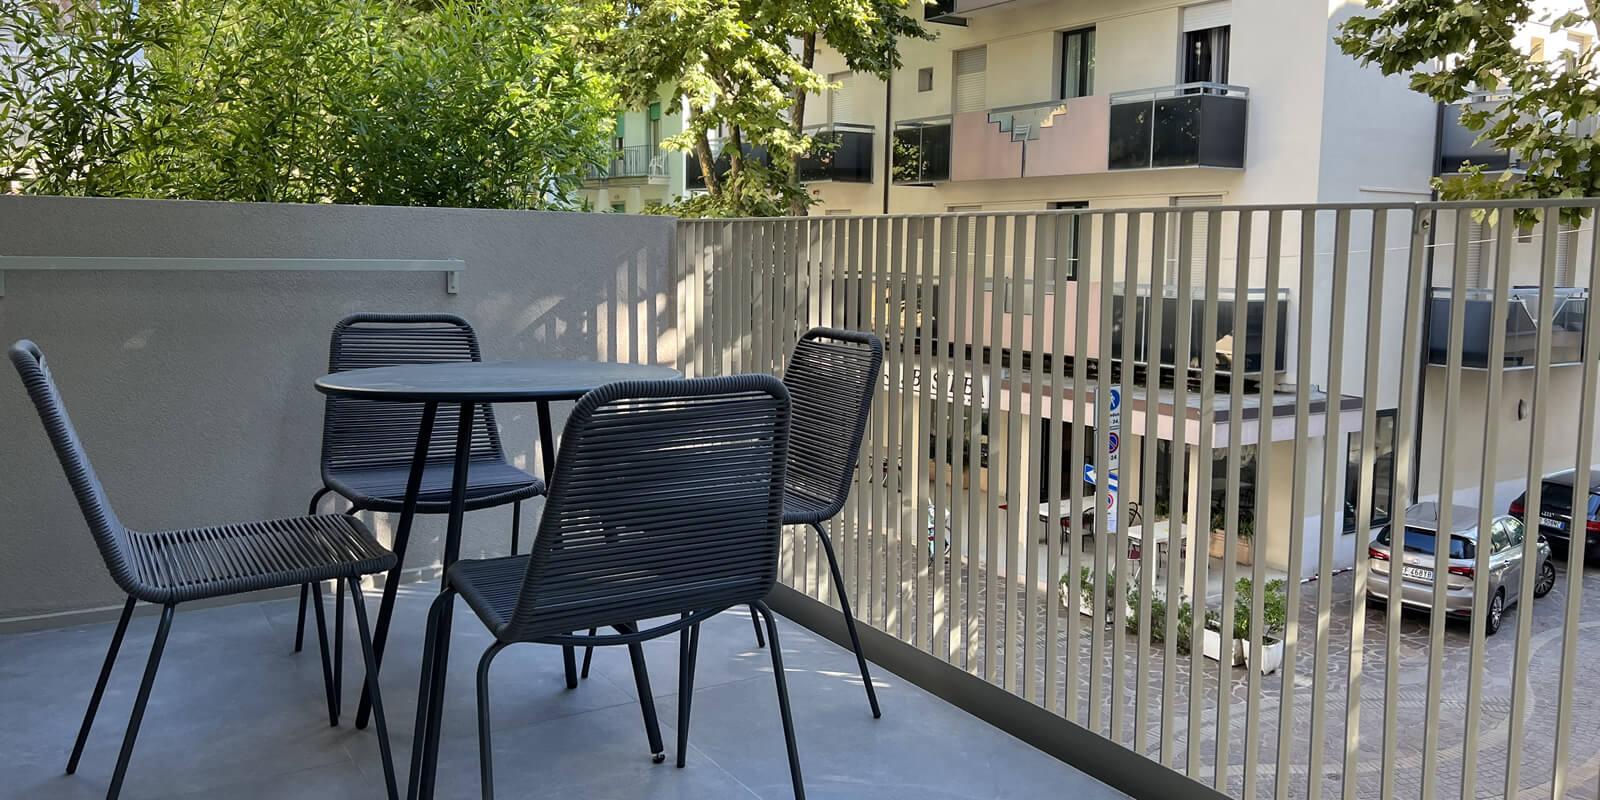 Terrace with table and chairs, view of buildings and trees.